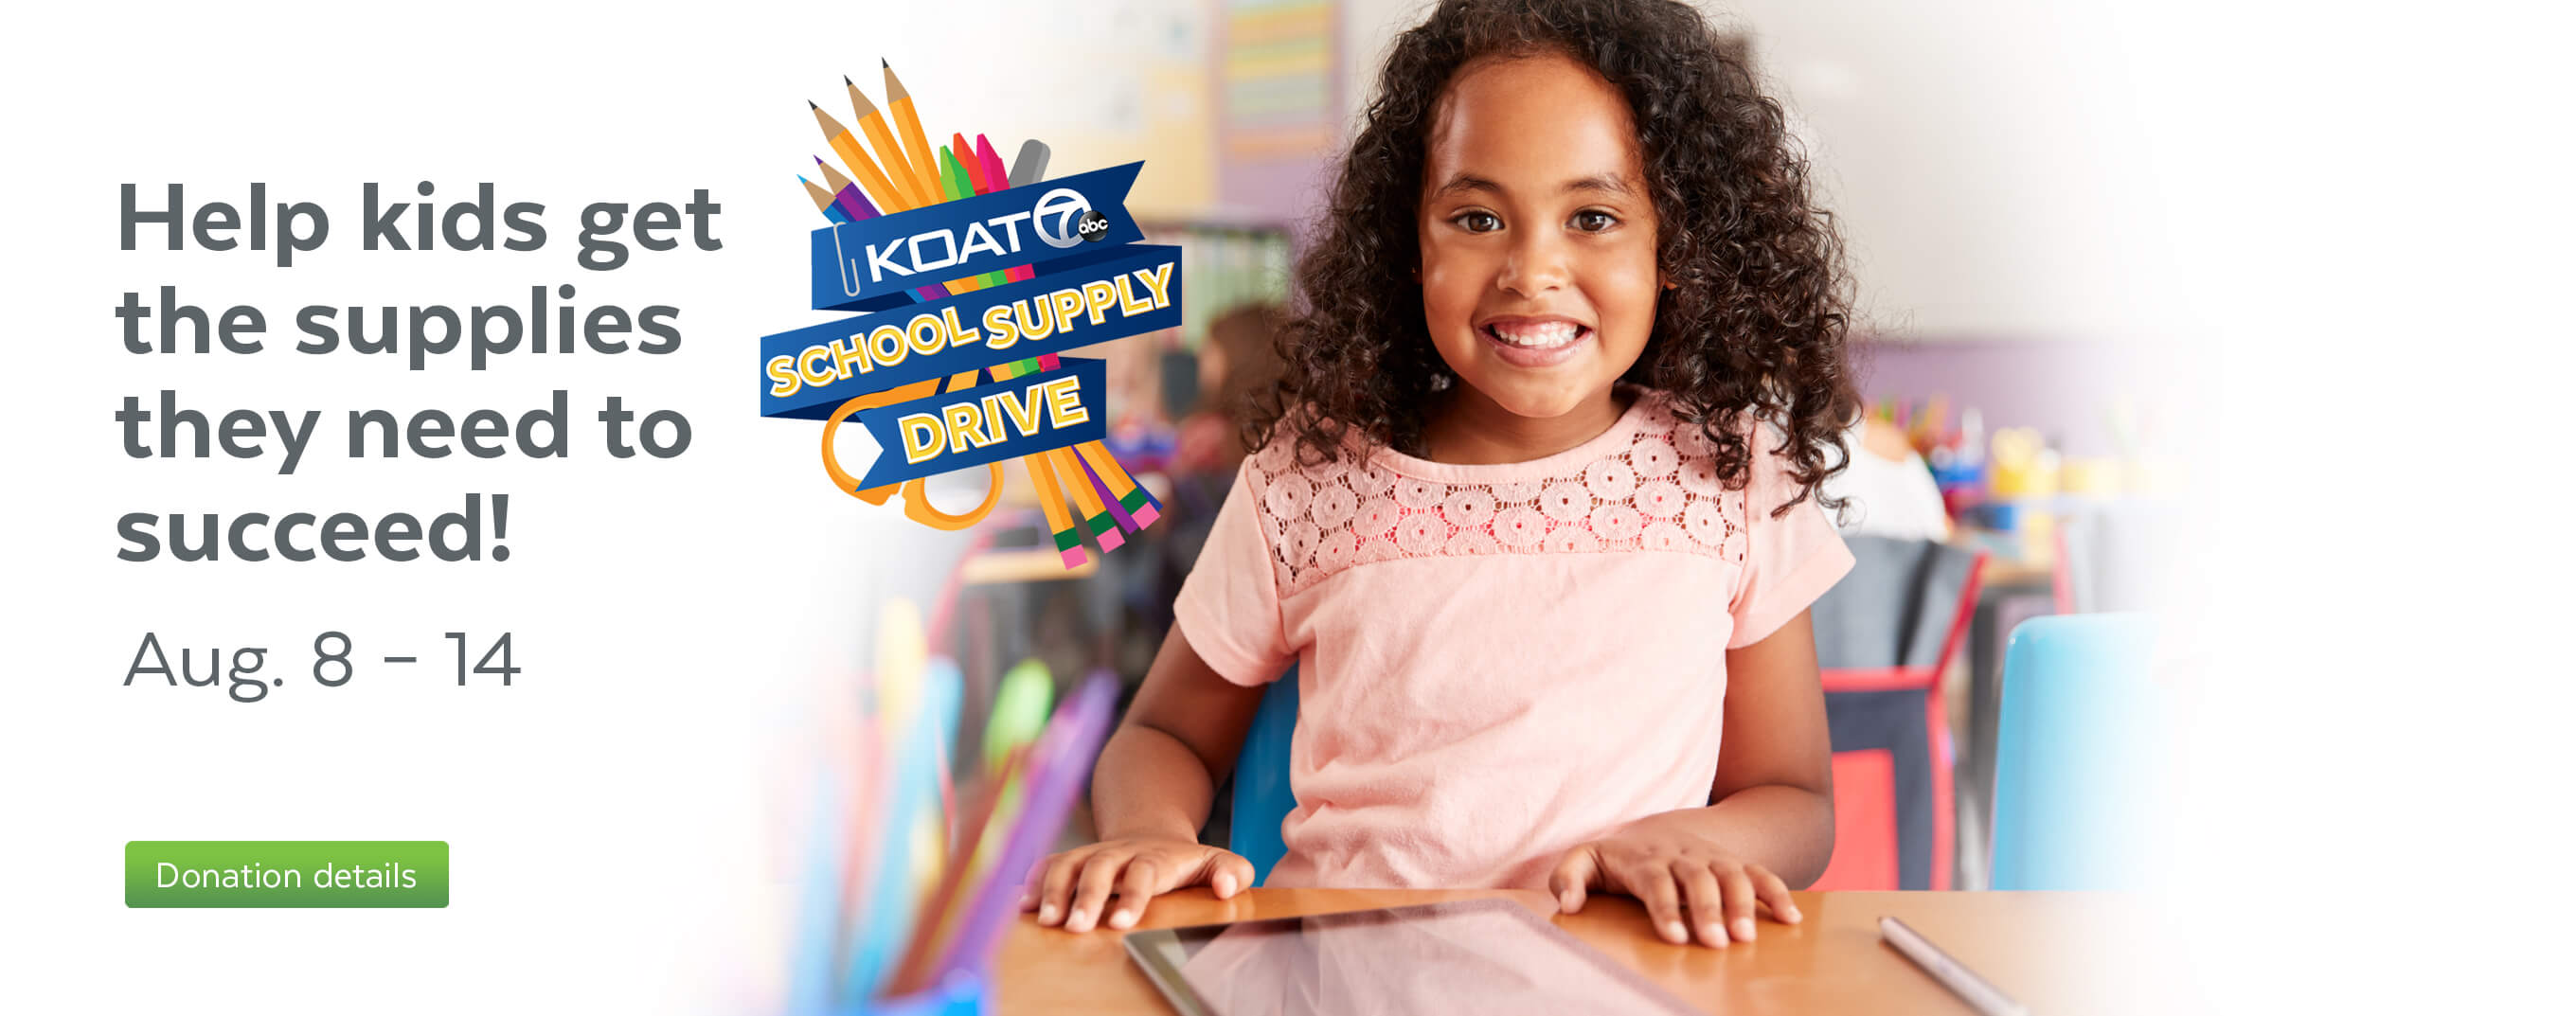 Help kids get the supplies they need to suceed! KOAT School Supply Drive - Donation Details